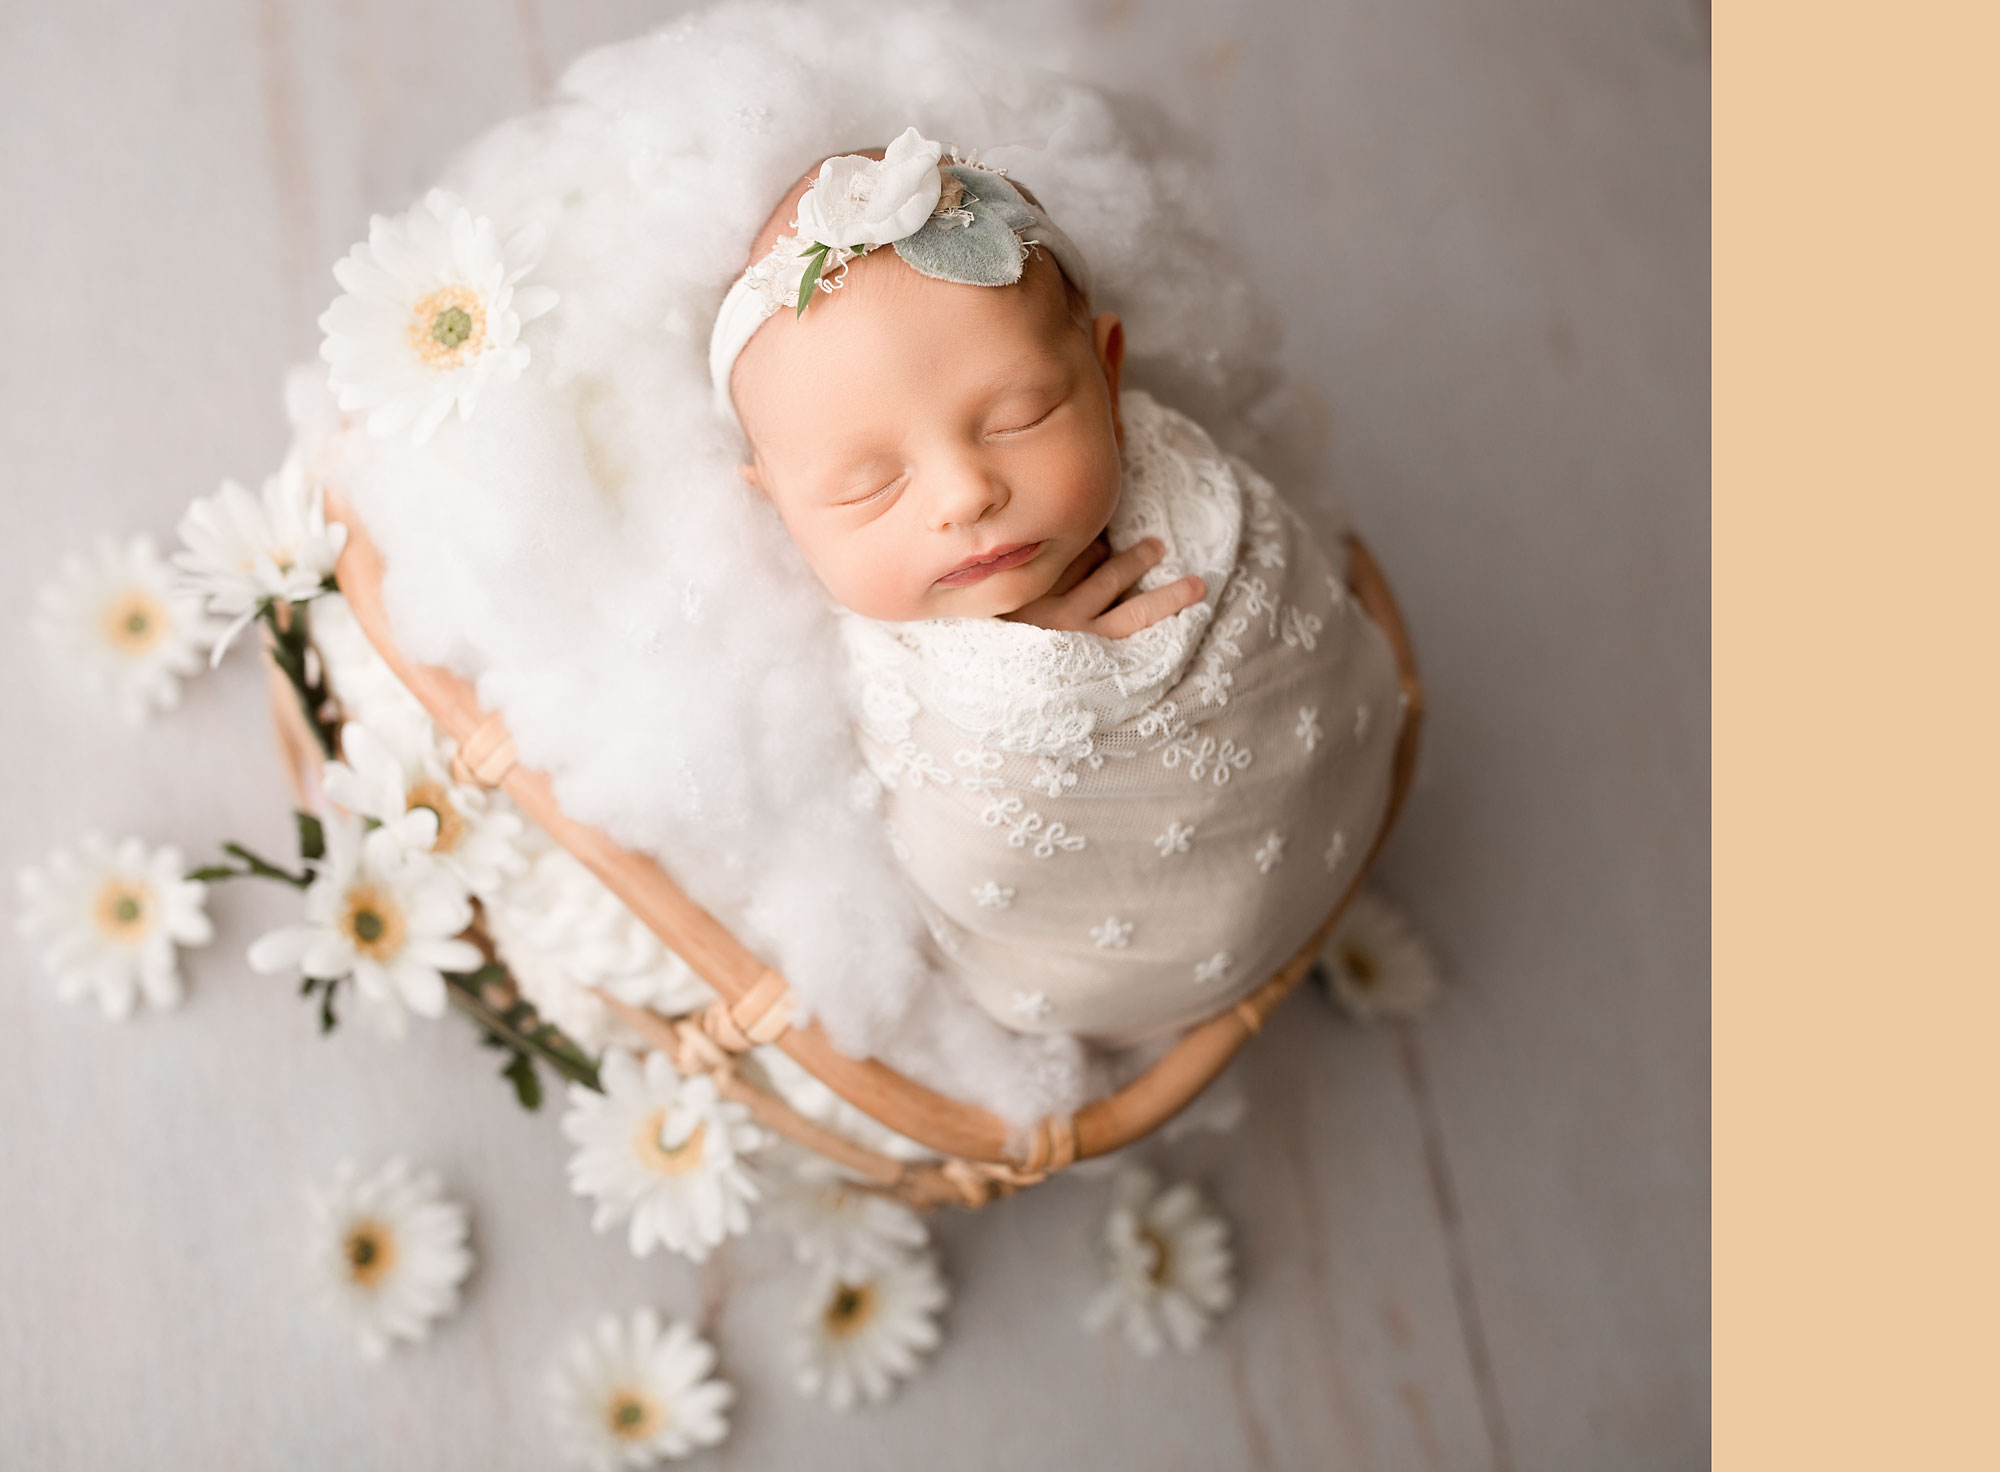 beautiful newborn photography nj, baby girl asleep on fluffy white blanket with daisies